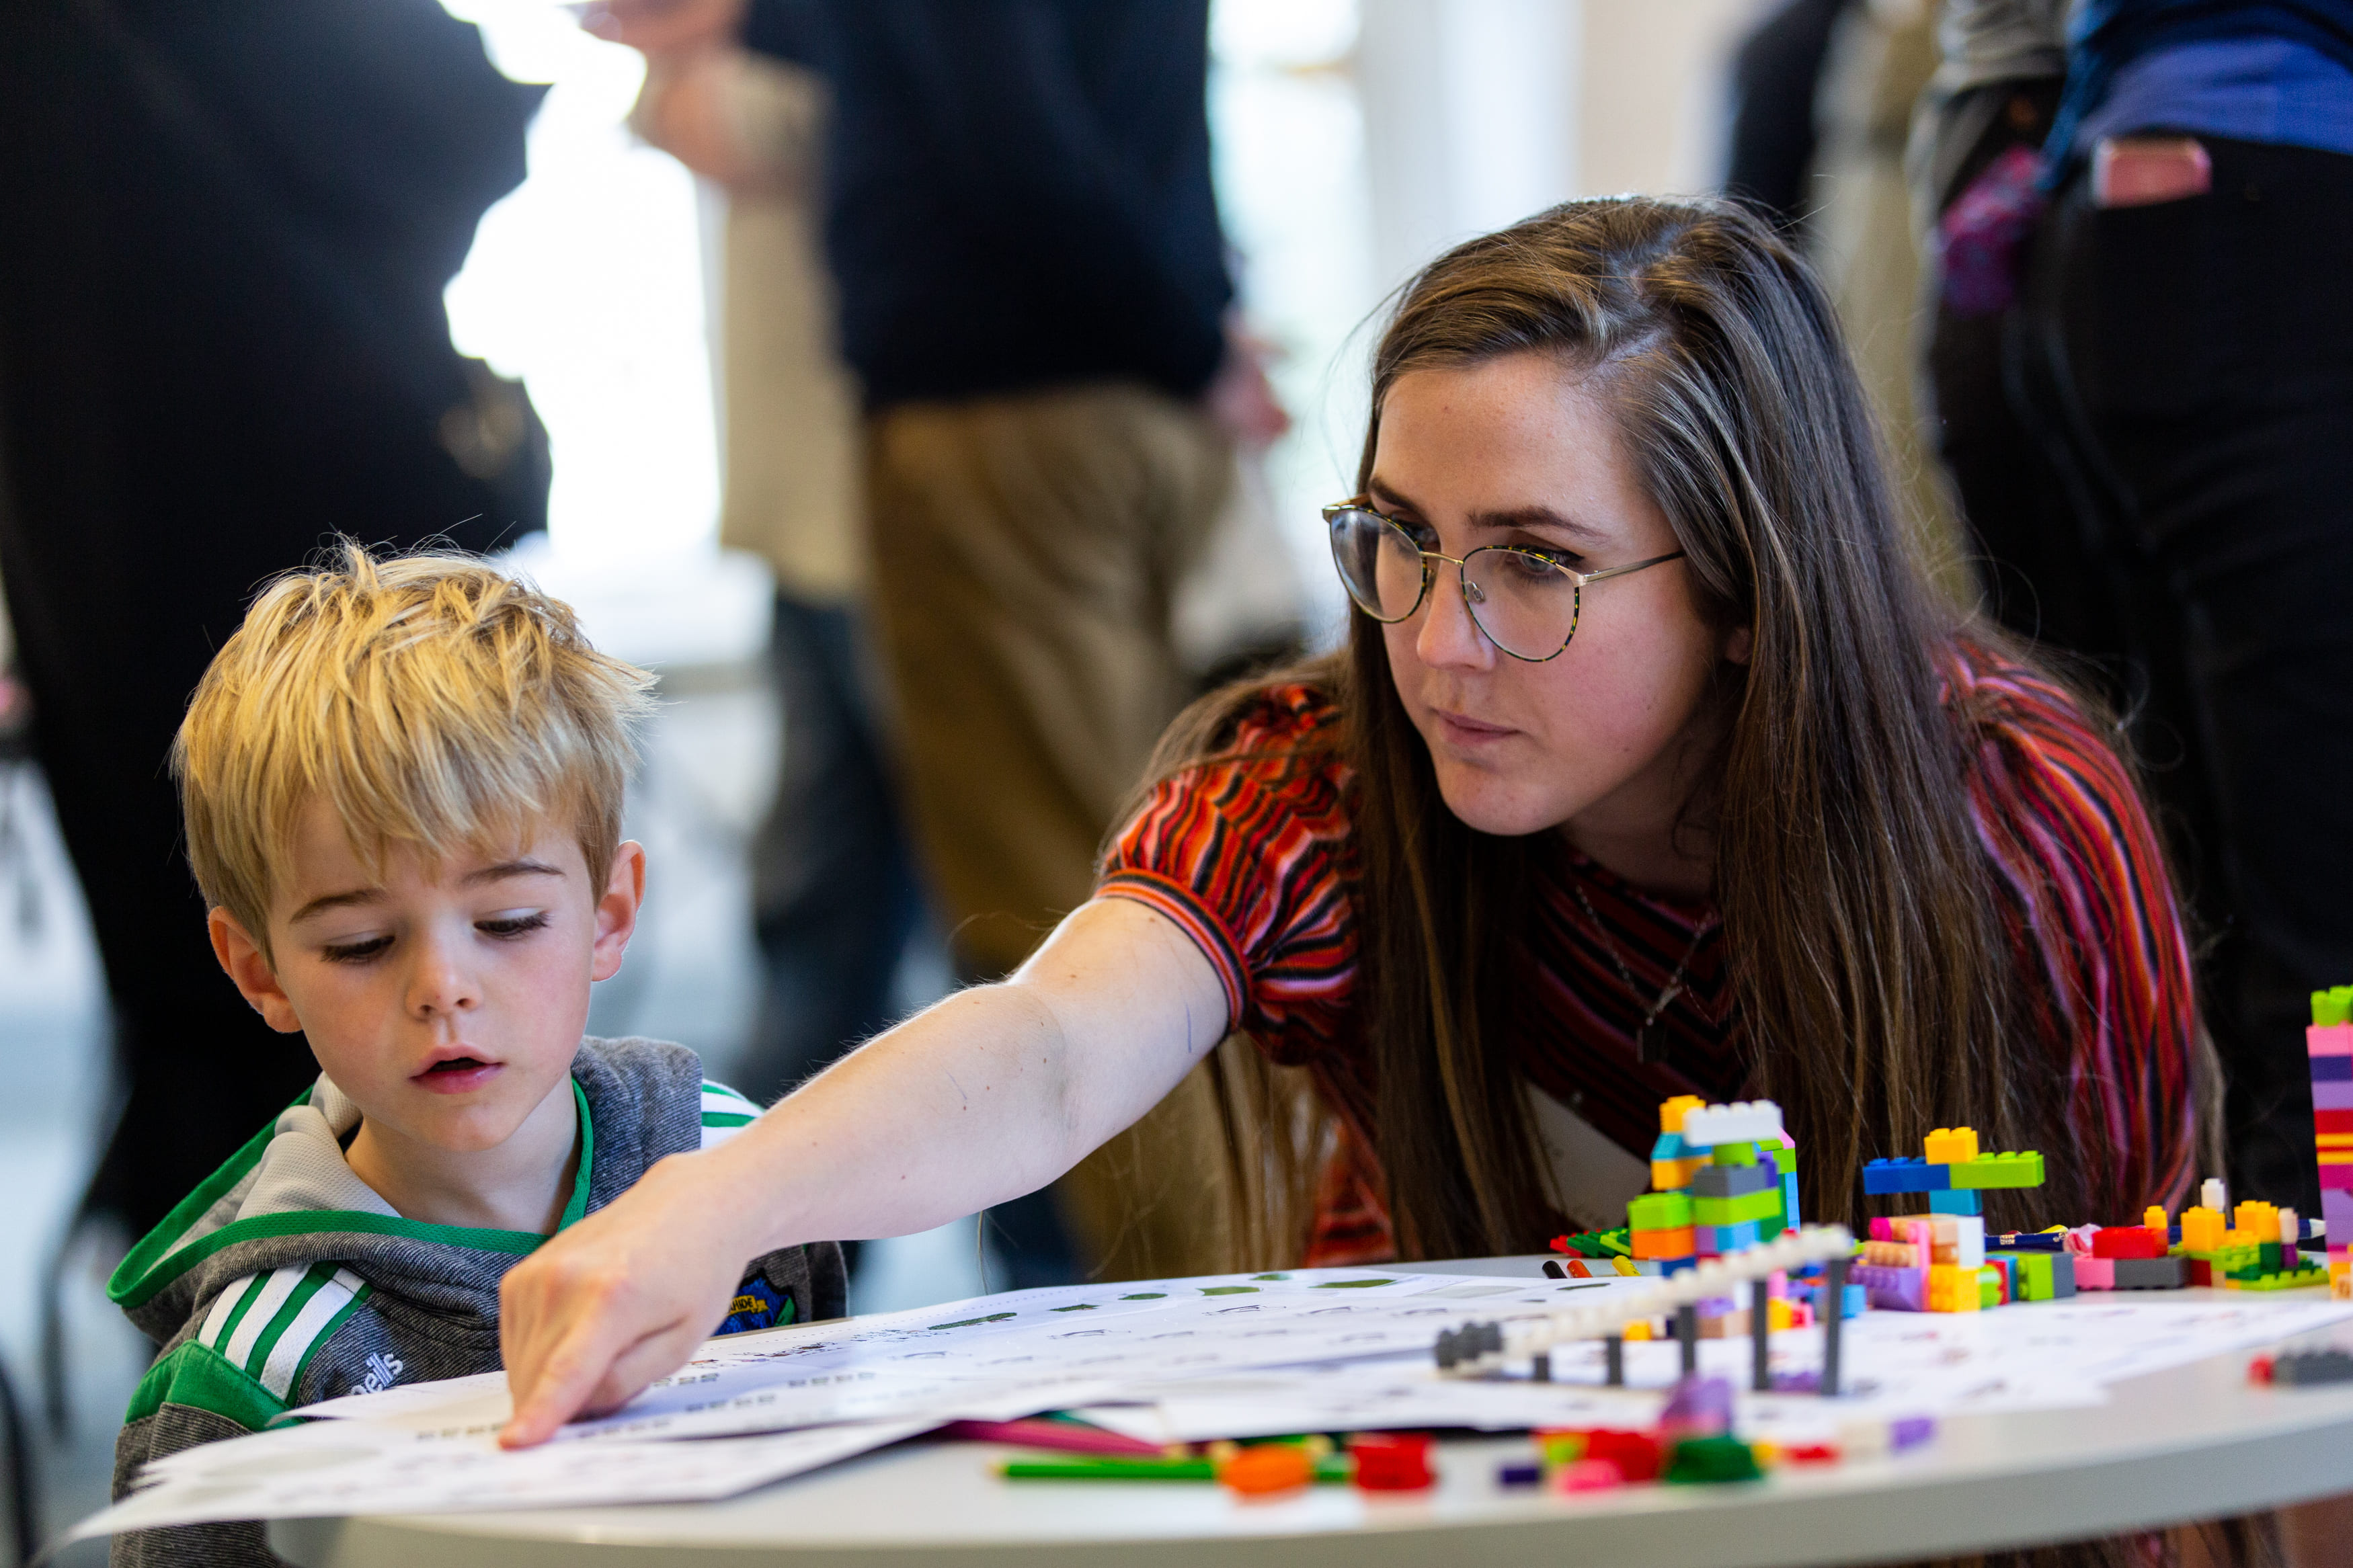 A young boy and a woman sit at a low table. The table has activity worksheets and lego. The woman points at something on the worksheet, explaining it to the child